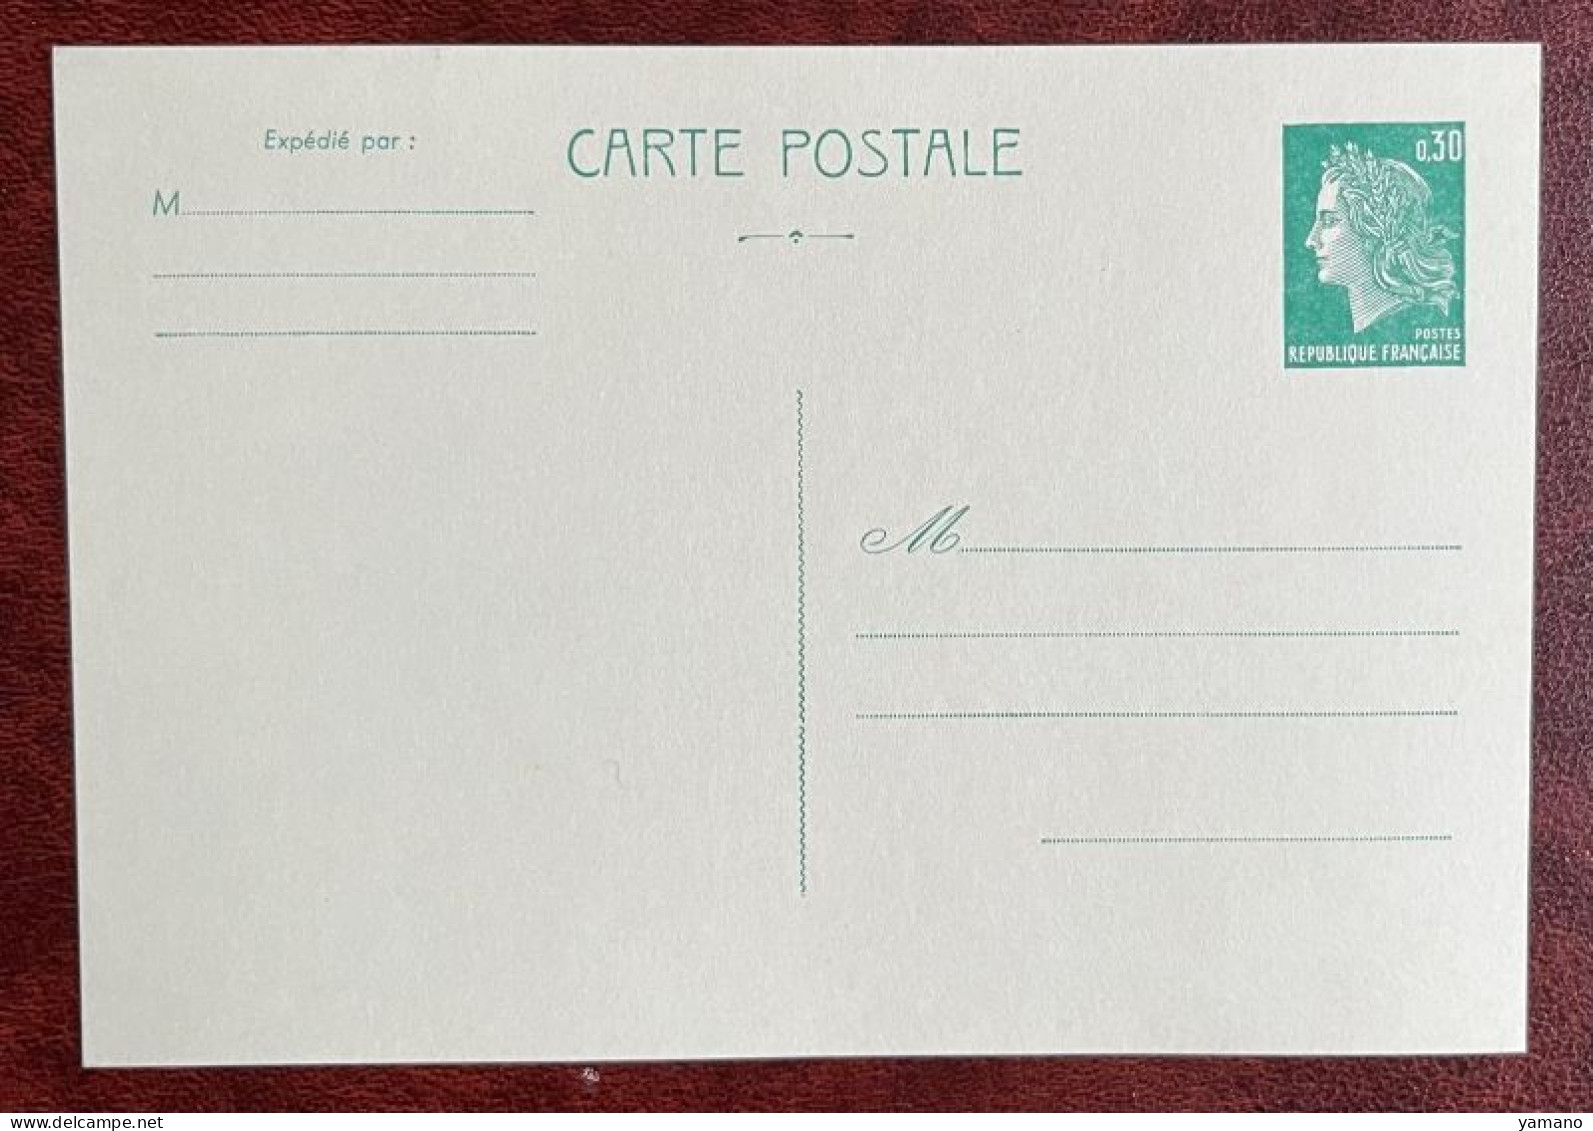 France 1969/73 -  Entier Postal Neuf  CHEFFER  0.30 F Recto Divisé  - Yvt  1611 CP1 - Standard Postcards & Stamped On Demand (before 1995)